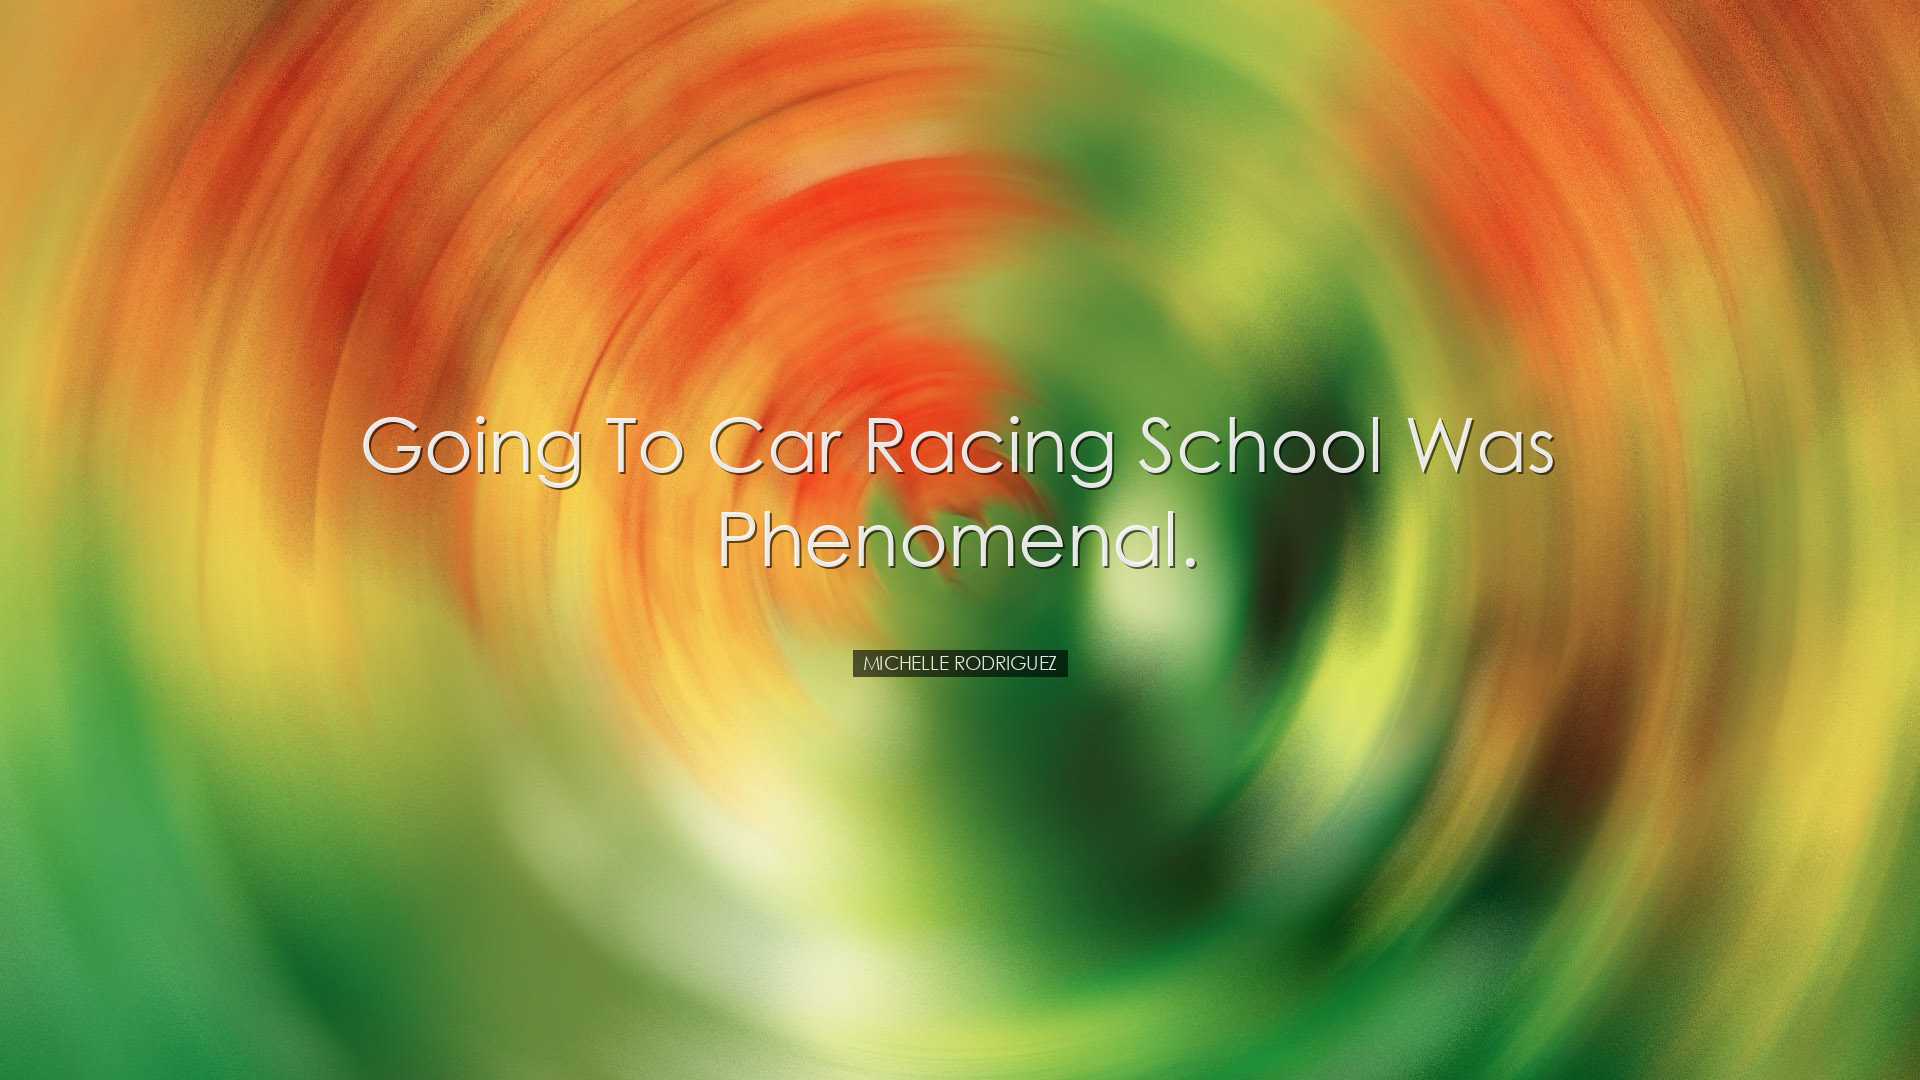 Going to car racing school was phenomenal. - Michelle Rodriguez